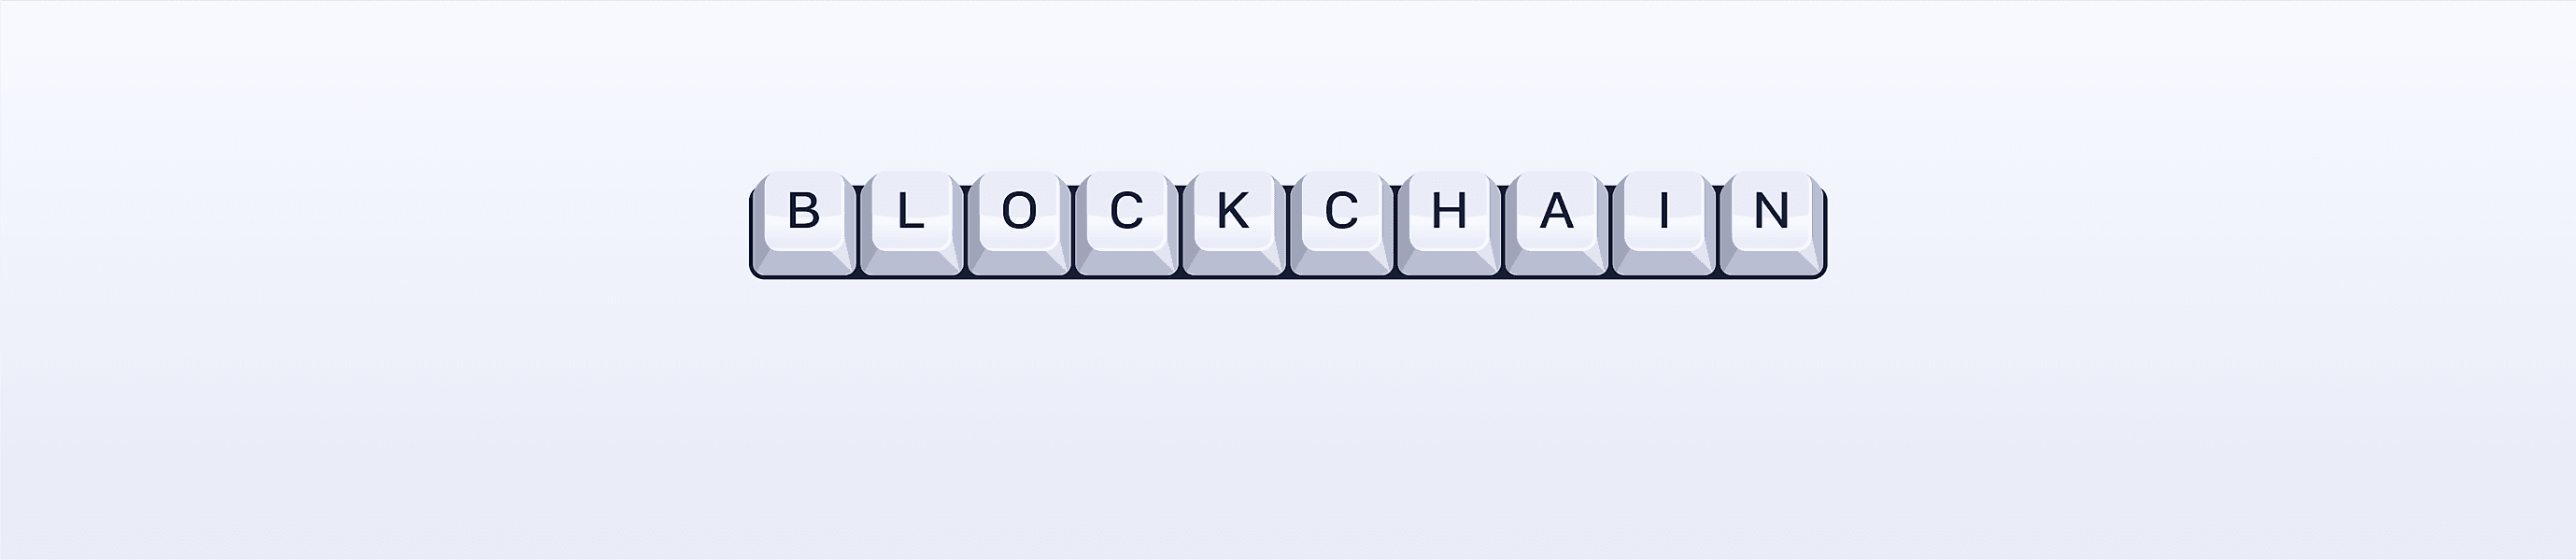 Blockchain In Business: How Blockchain Technology Can Support And Improve Business